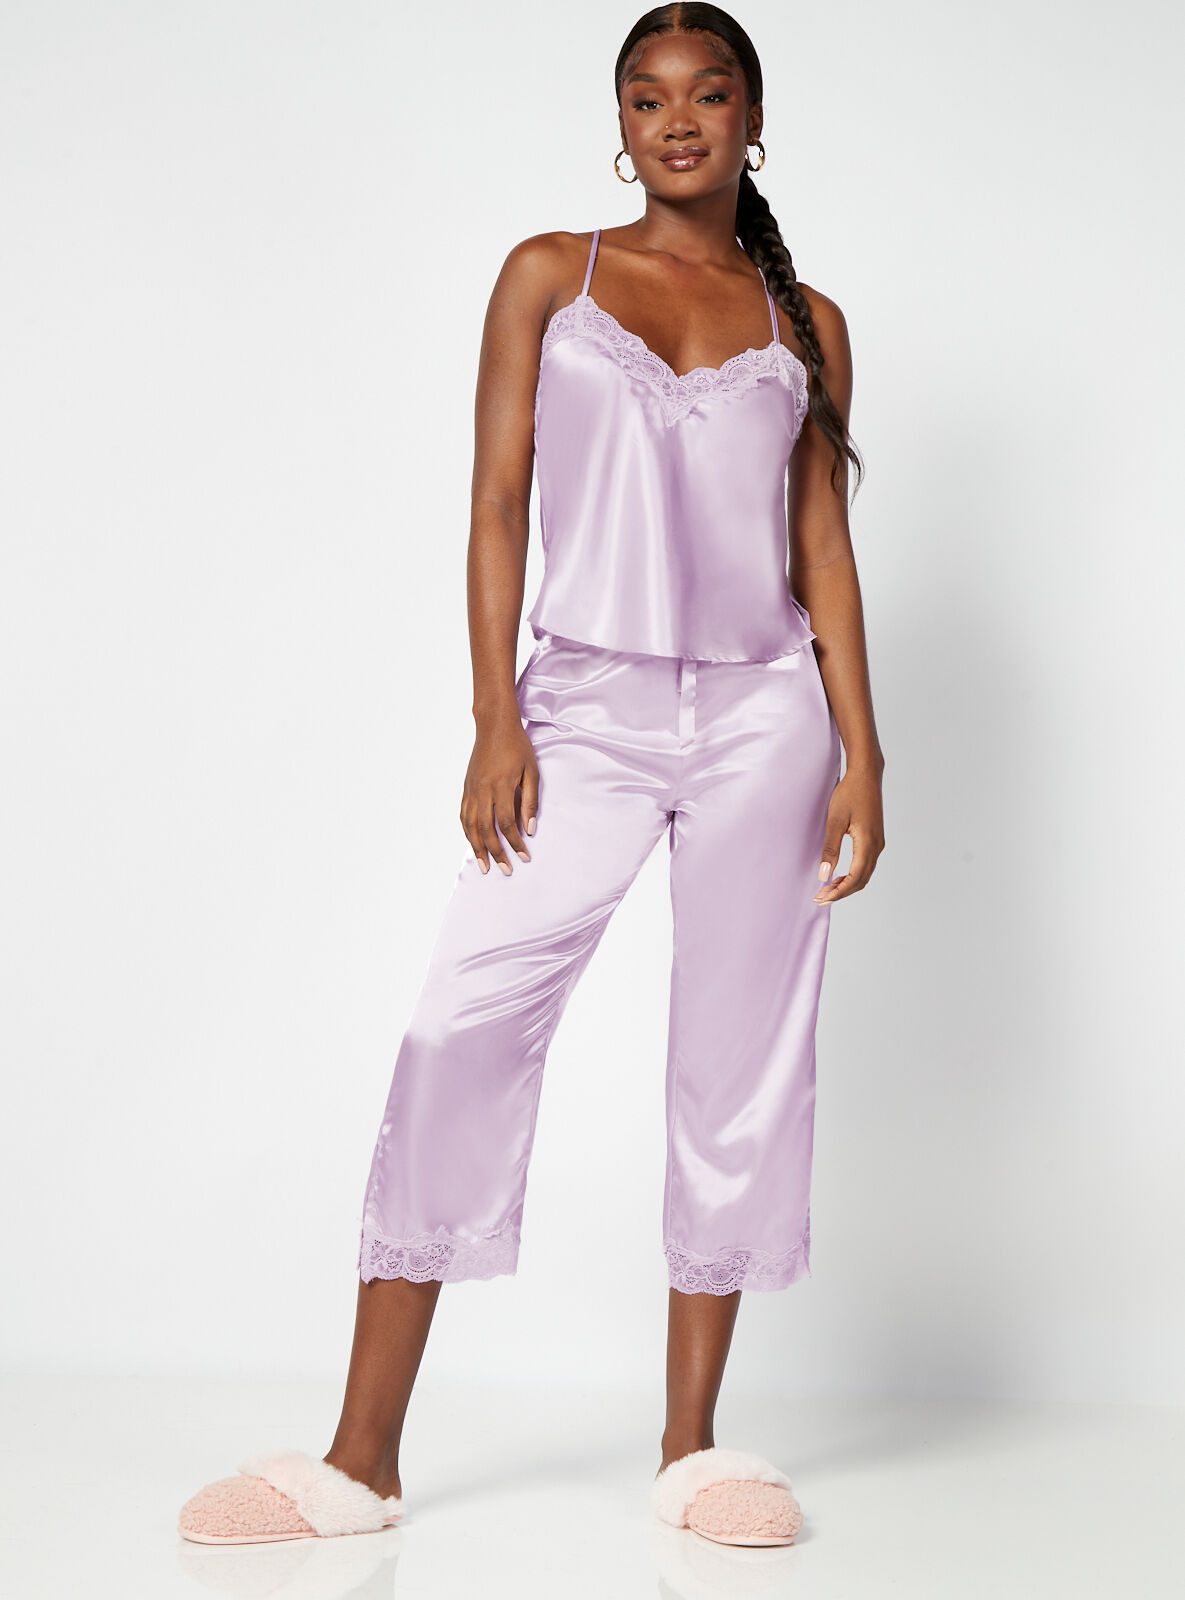 Boux Avenue Marnie satin and lace cami and pant set - Lavender Mix - 12